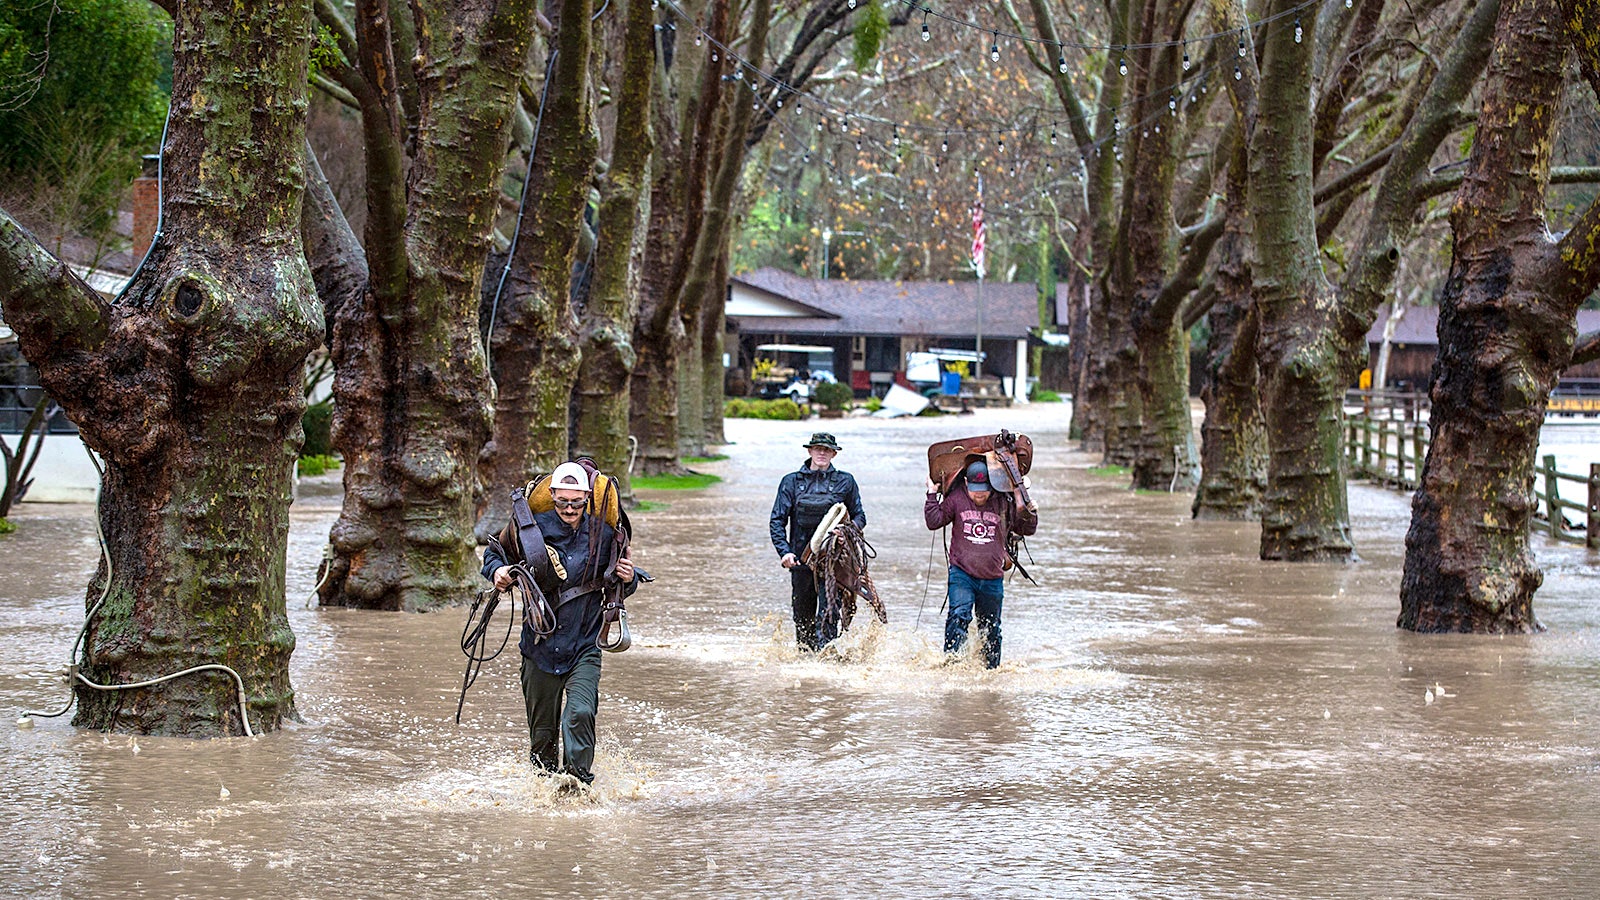  Solvang winery workers carry ranch gear through knee-high flood waters in California